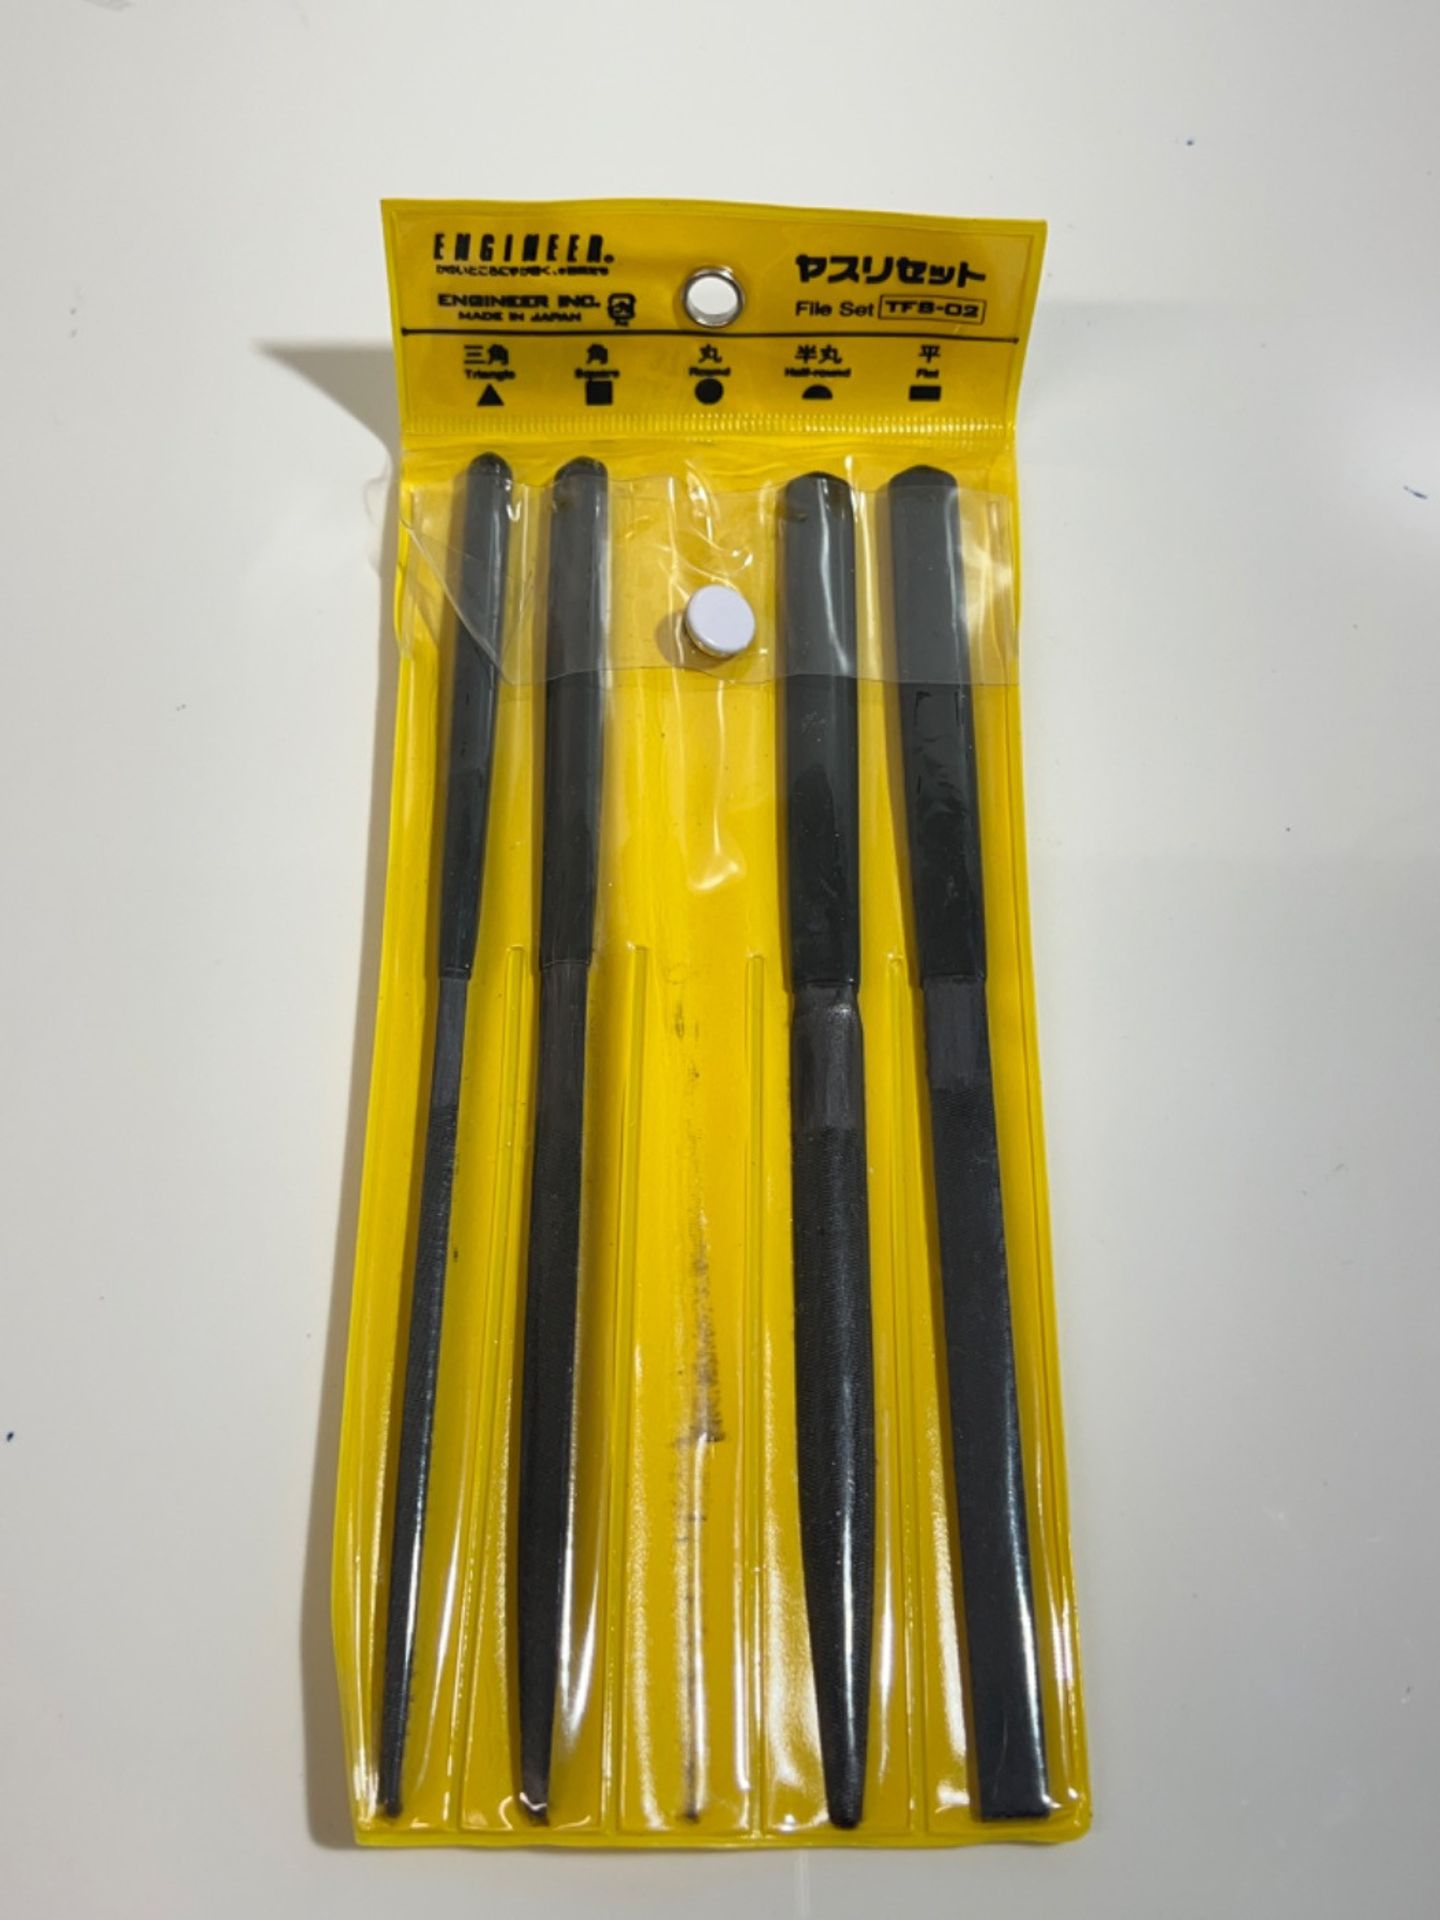 5 Piece Mixed Precision Mini File Set (Smaller Sized Needle Type Files). Made In Japan. Engineer... - Image 3 of 3